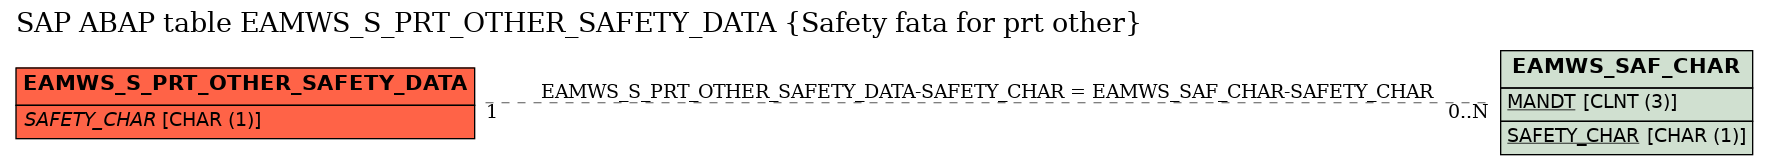 E-R Diagram for table EAMWS_S_PRT_OTHER_SAFETY_DATA (Safety fata for prt other)